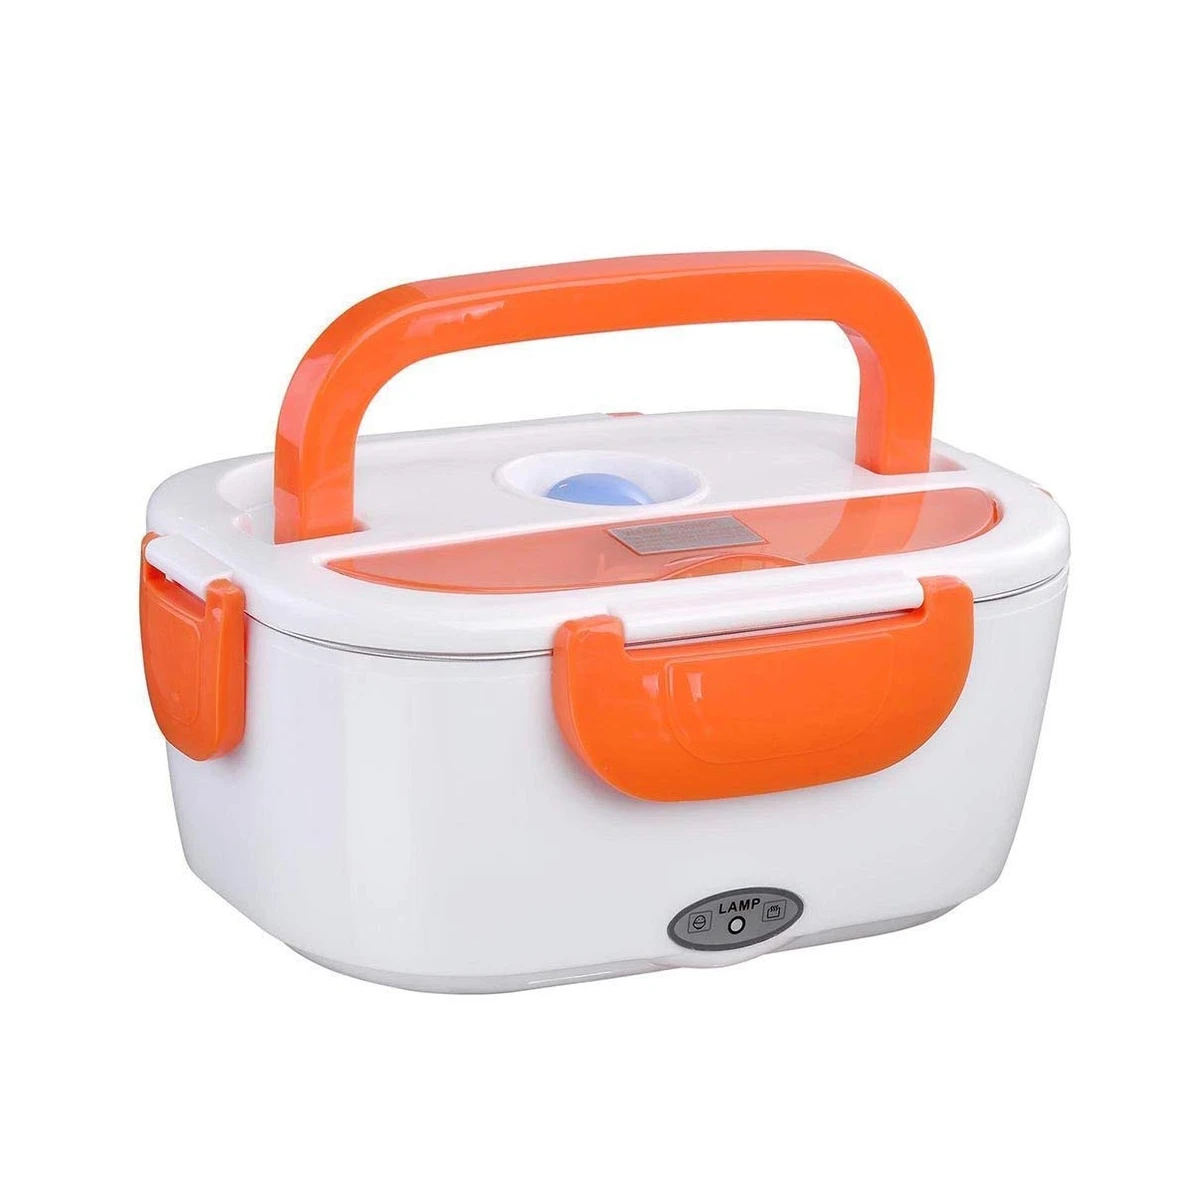 Electrical lunch box, Electric lunch box, office lunch box, food box, electric tiffin box